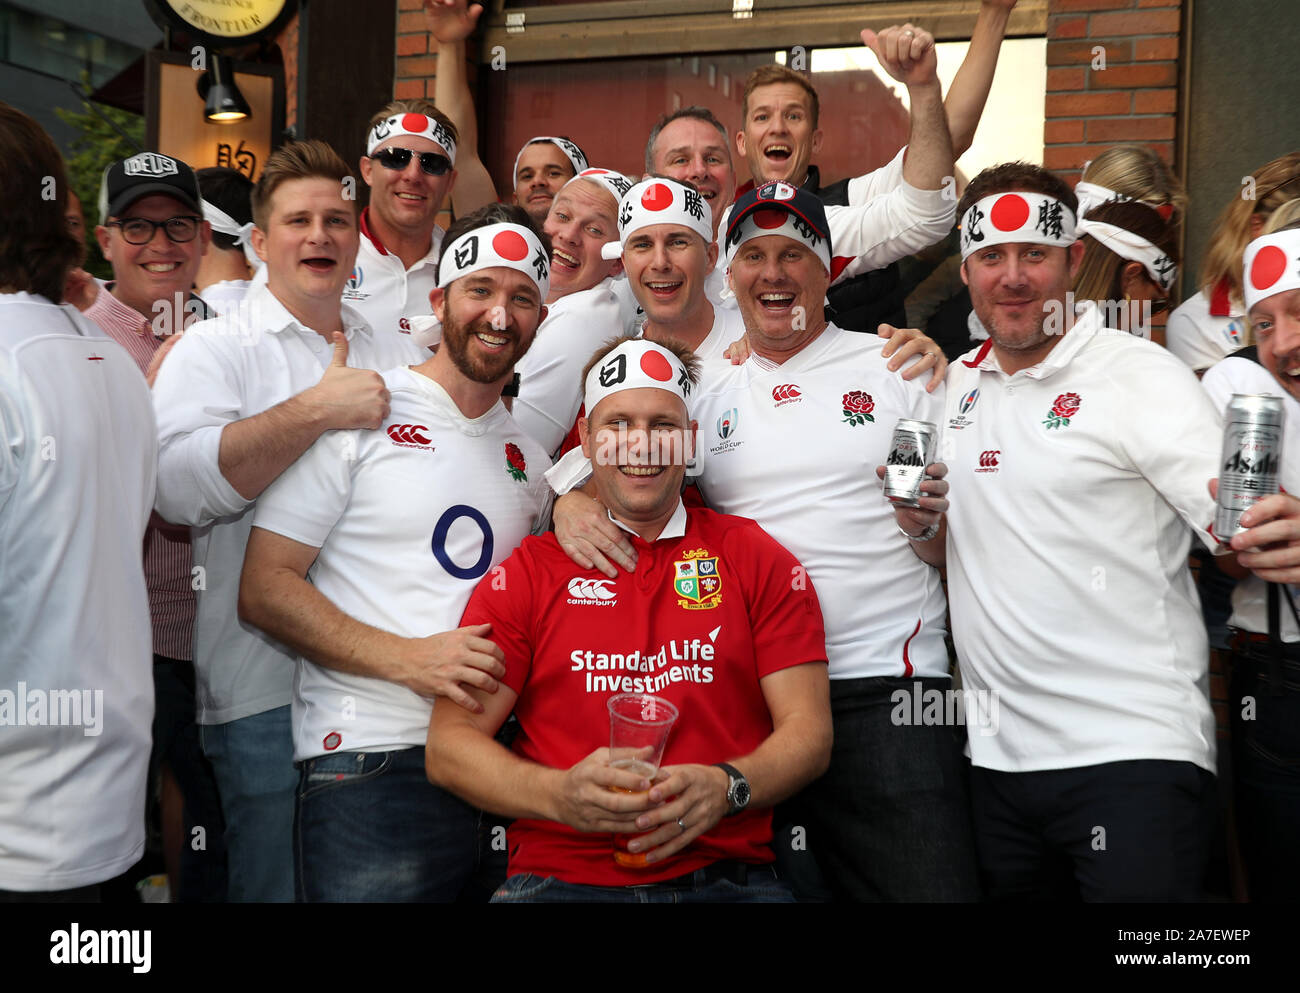 England fan show their support ahead of the 2019 Rugby World Cup final match at Yokohama Stadium. Stock Photo